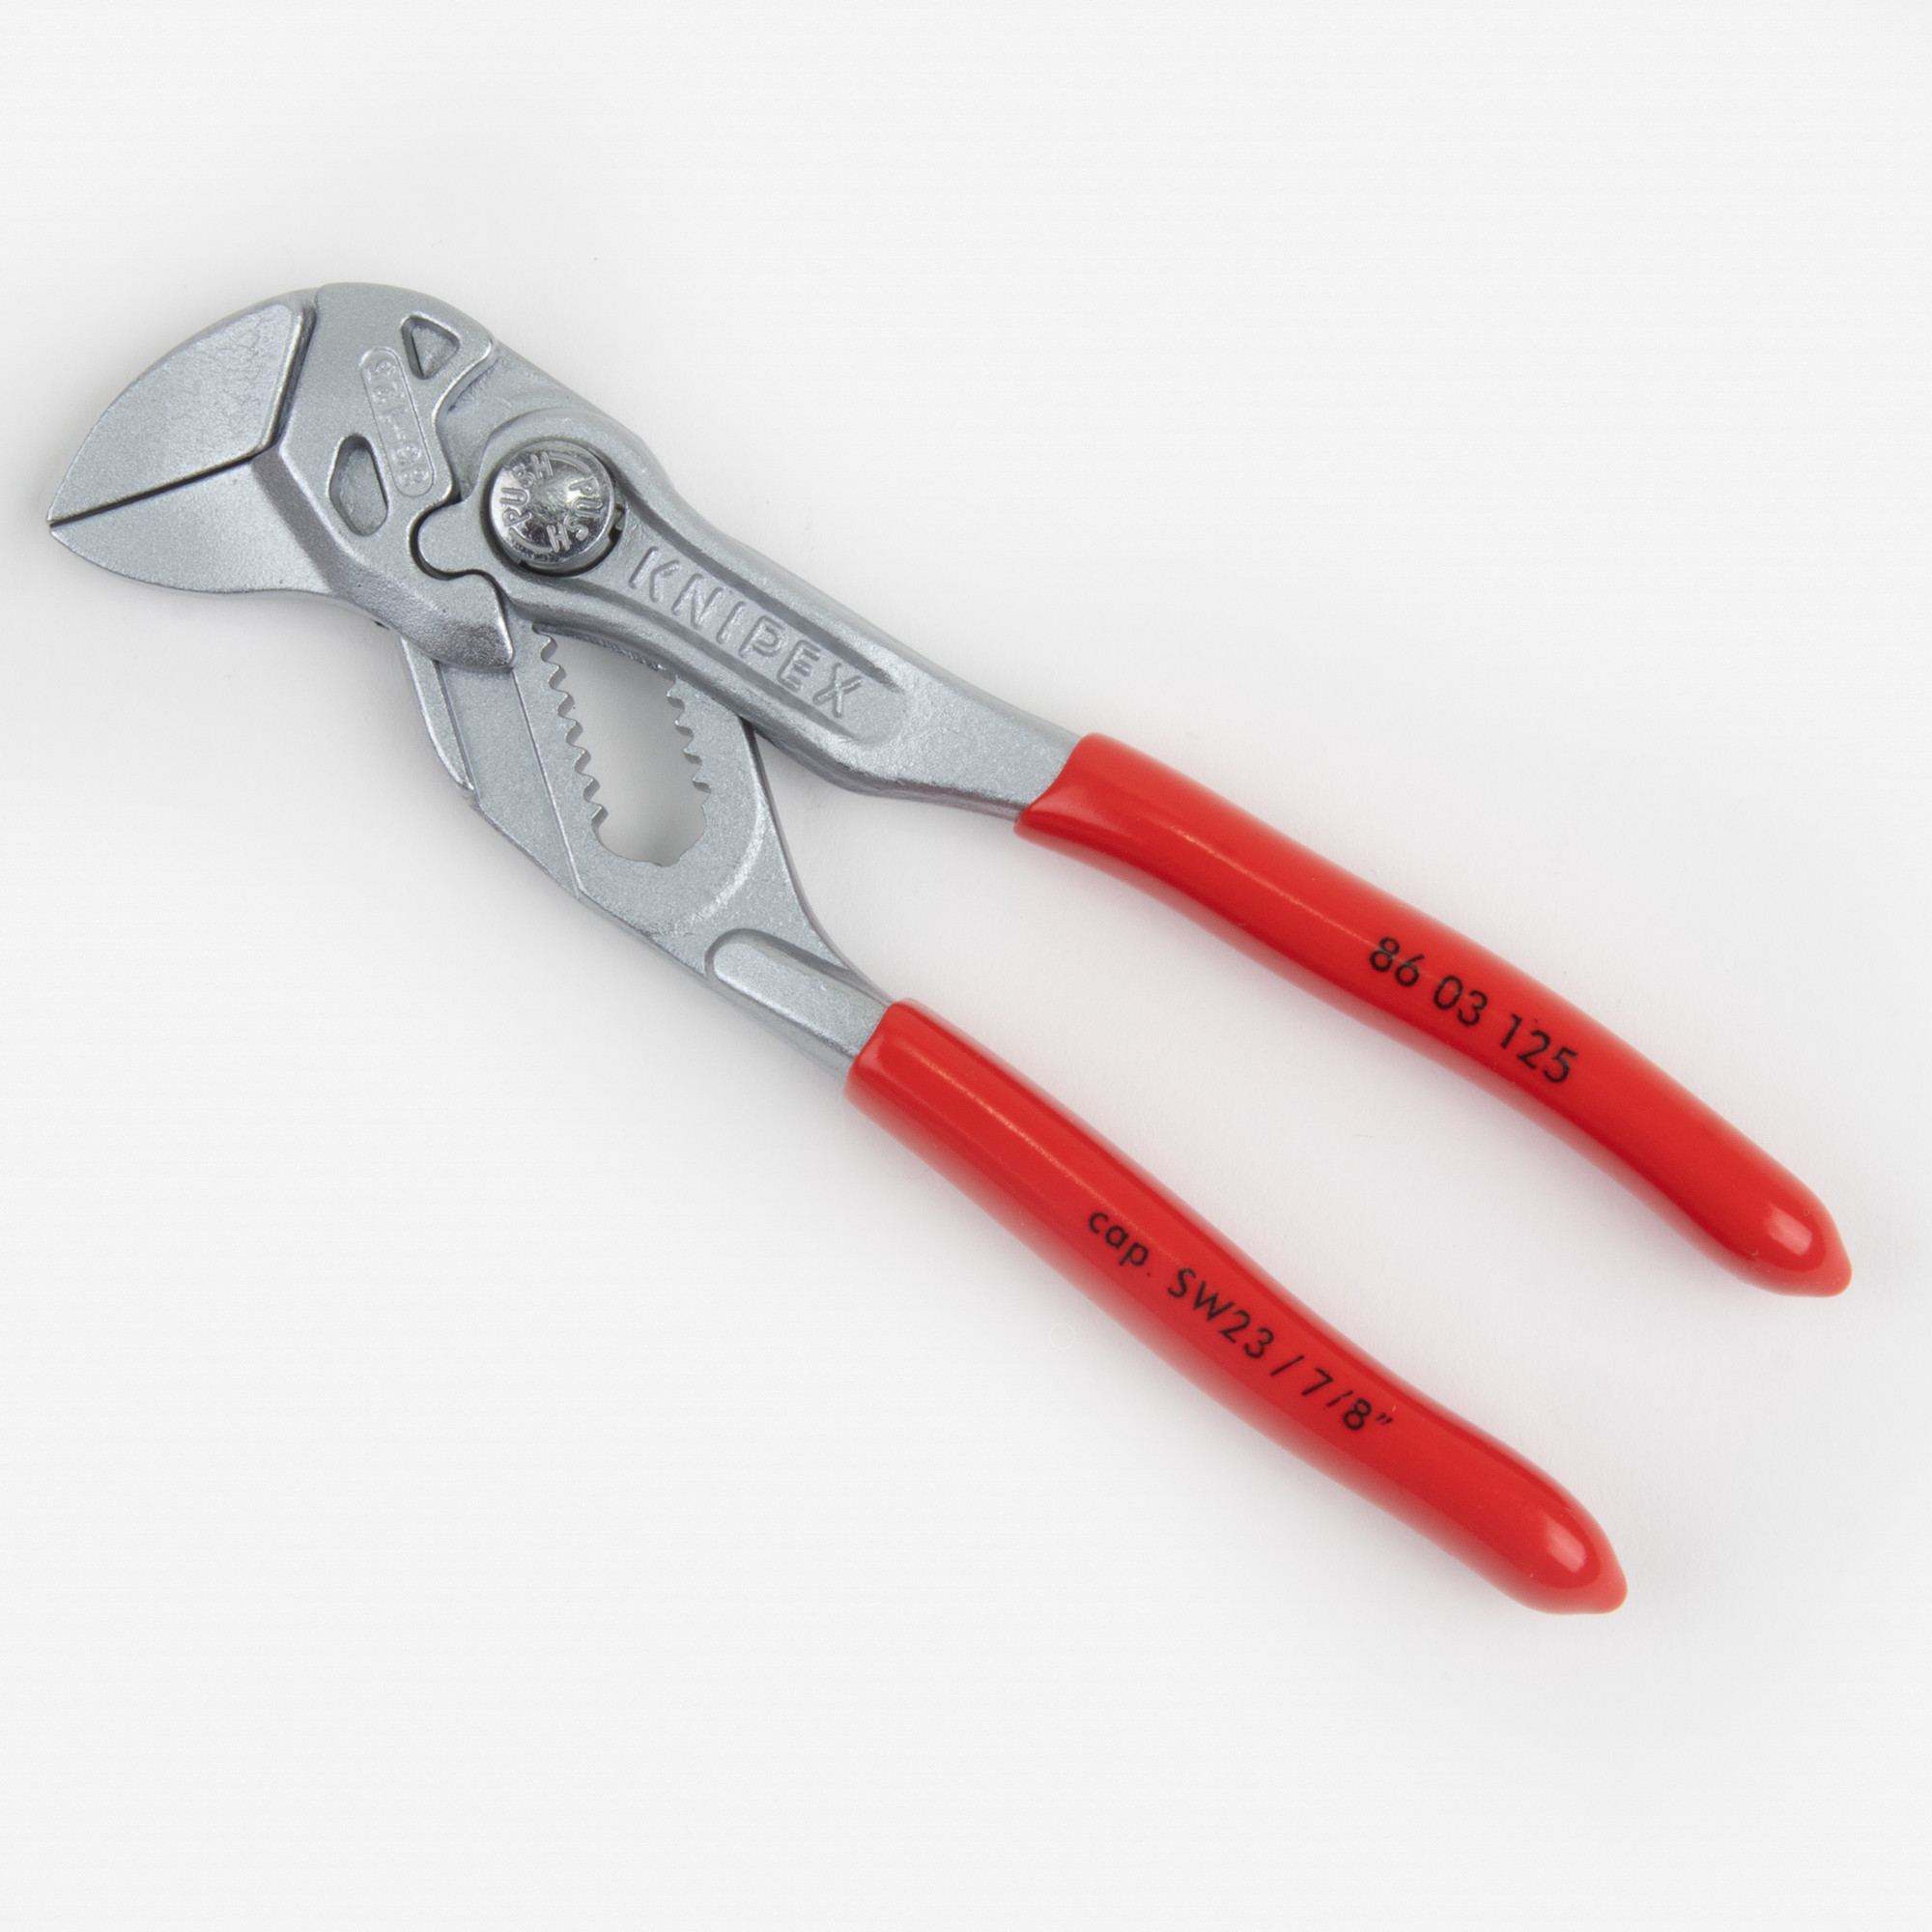 Knipex 5 Pliers Wrench Mini (86 03 125) - Blade HQ